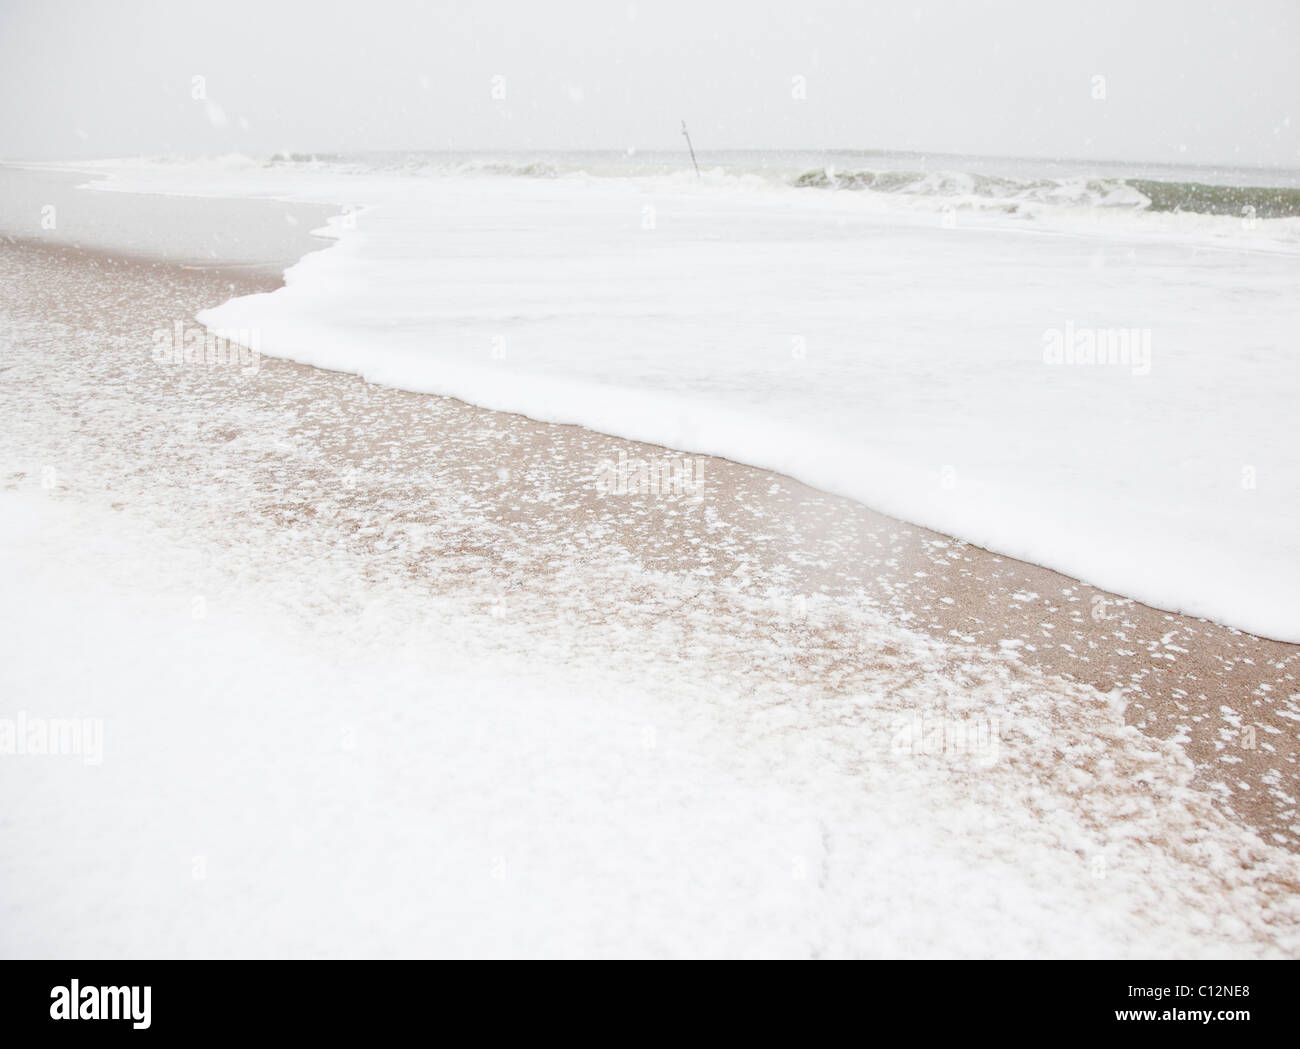 USA, New York State, Rockaway Beach, plage en hiver Banque D'Images